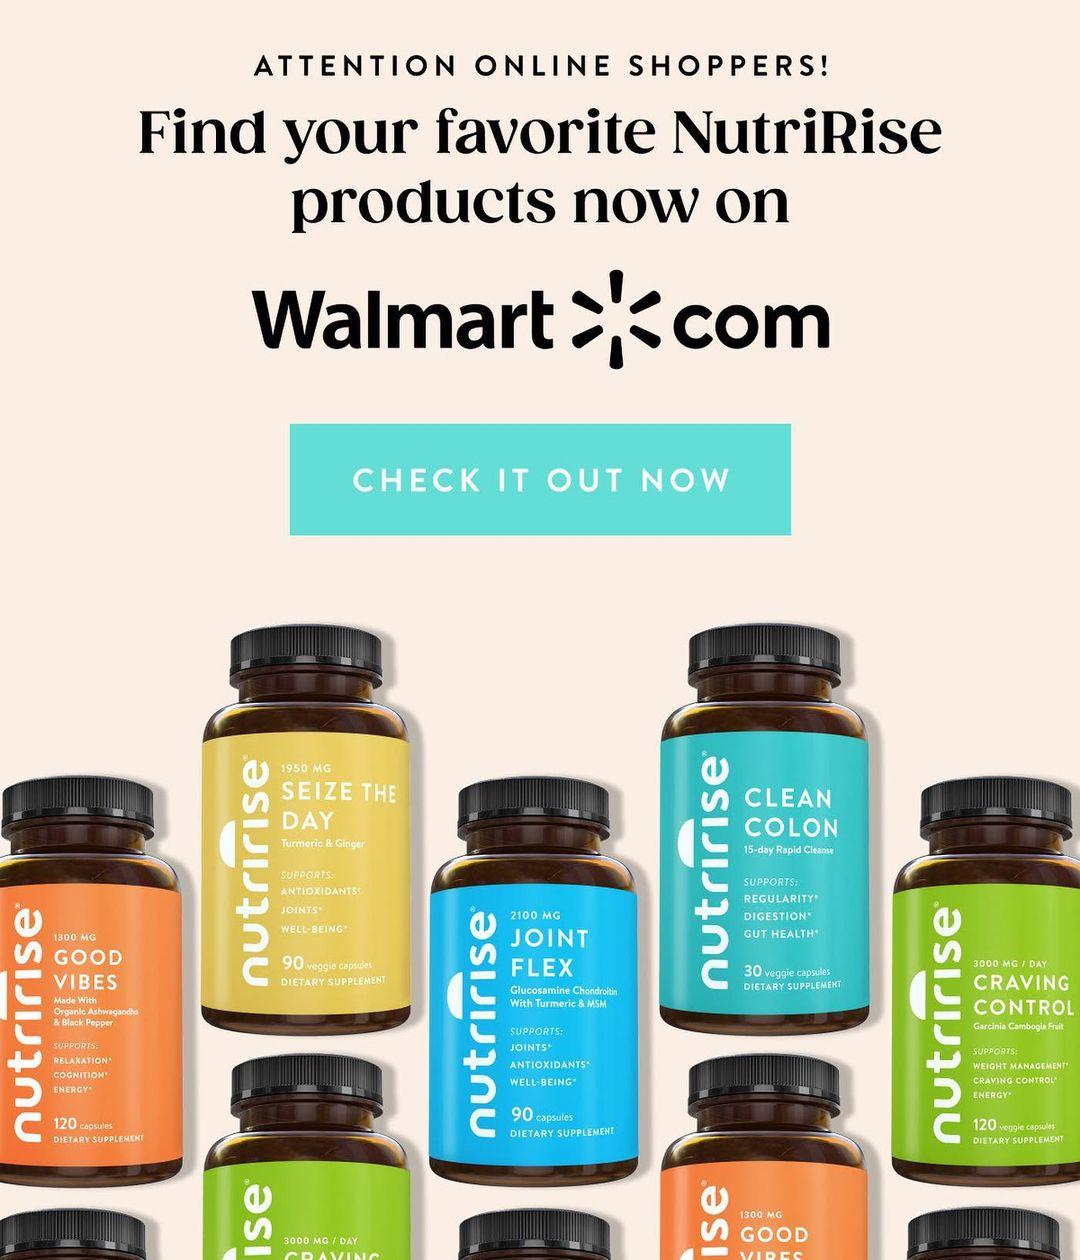 class="content__text"
 Incredibly proud of myself and @ramshamirza_1 to see there day where where @nutririsehealth is now available at Walmart. Wow, just wow! Going to continue to relish this for the next bit and then on to the next one. Huge thanks and hugs to our beautiful and incredible team. We love and appreciate you! Find our products on Walmart here https://nutri.ink/3V7IaM8 #proud #walmart #nutririse #business #entrepreneur #desire #motivation #win #driven #ceo #ceolife #entrepreneurship #entrepreneurs 
 